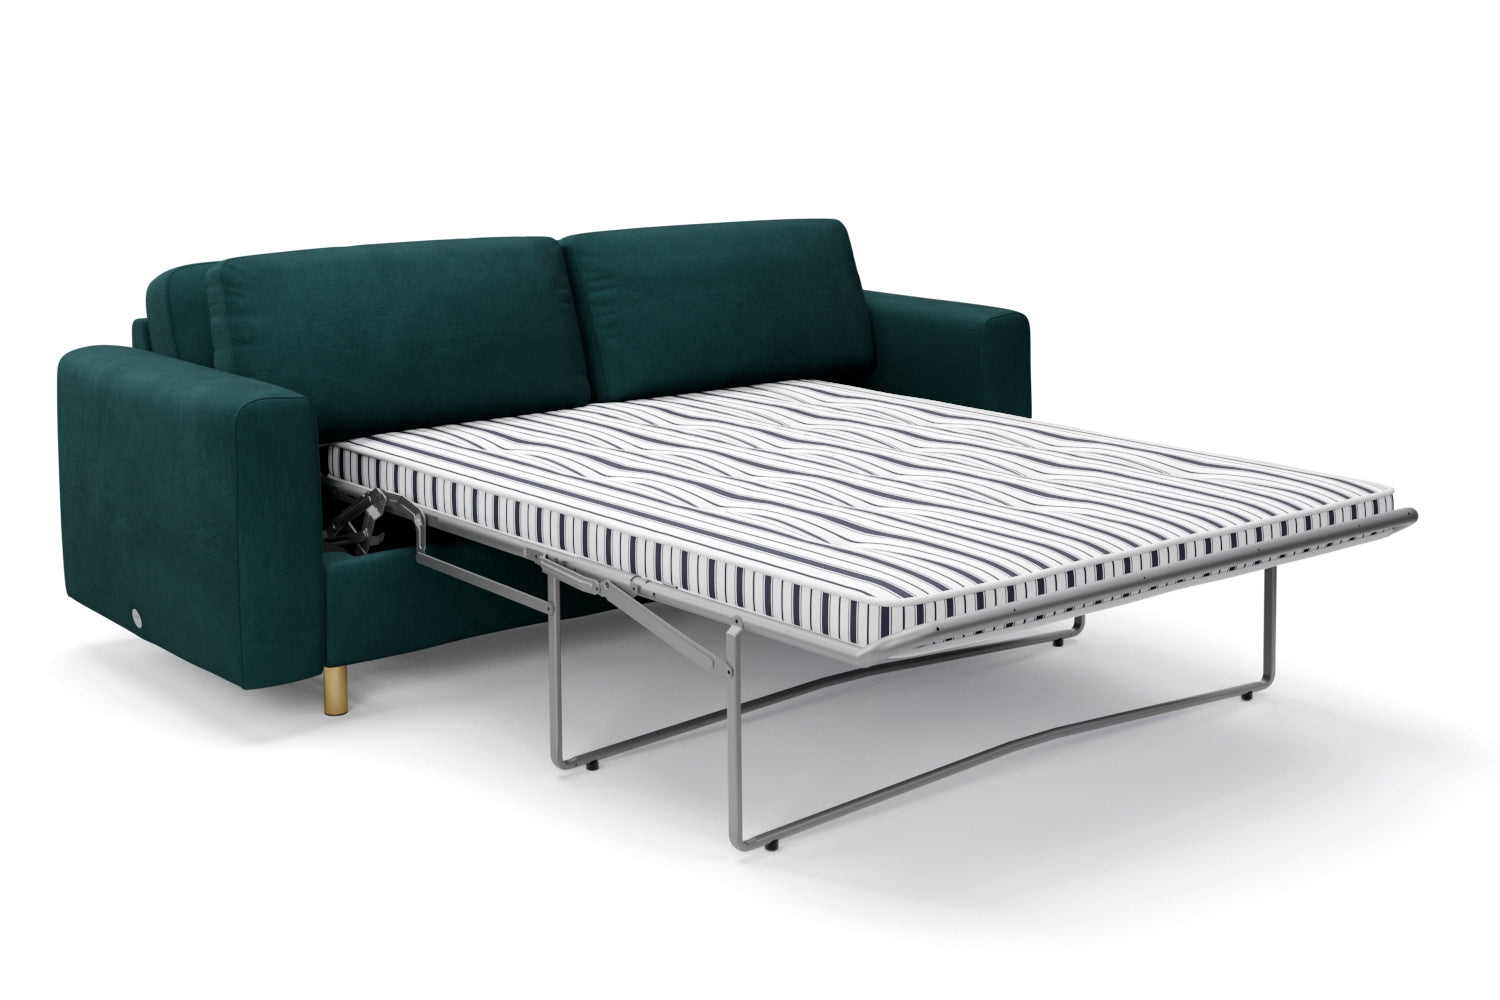 The Big Chill - 3 Seater Sofa Bed - Pine Green